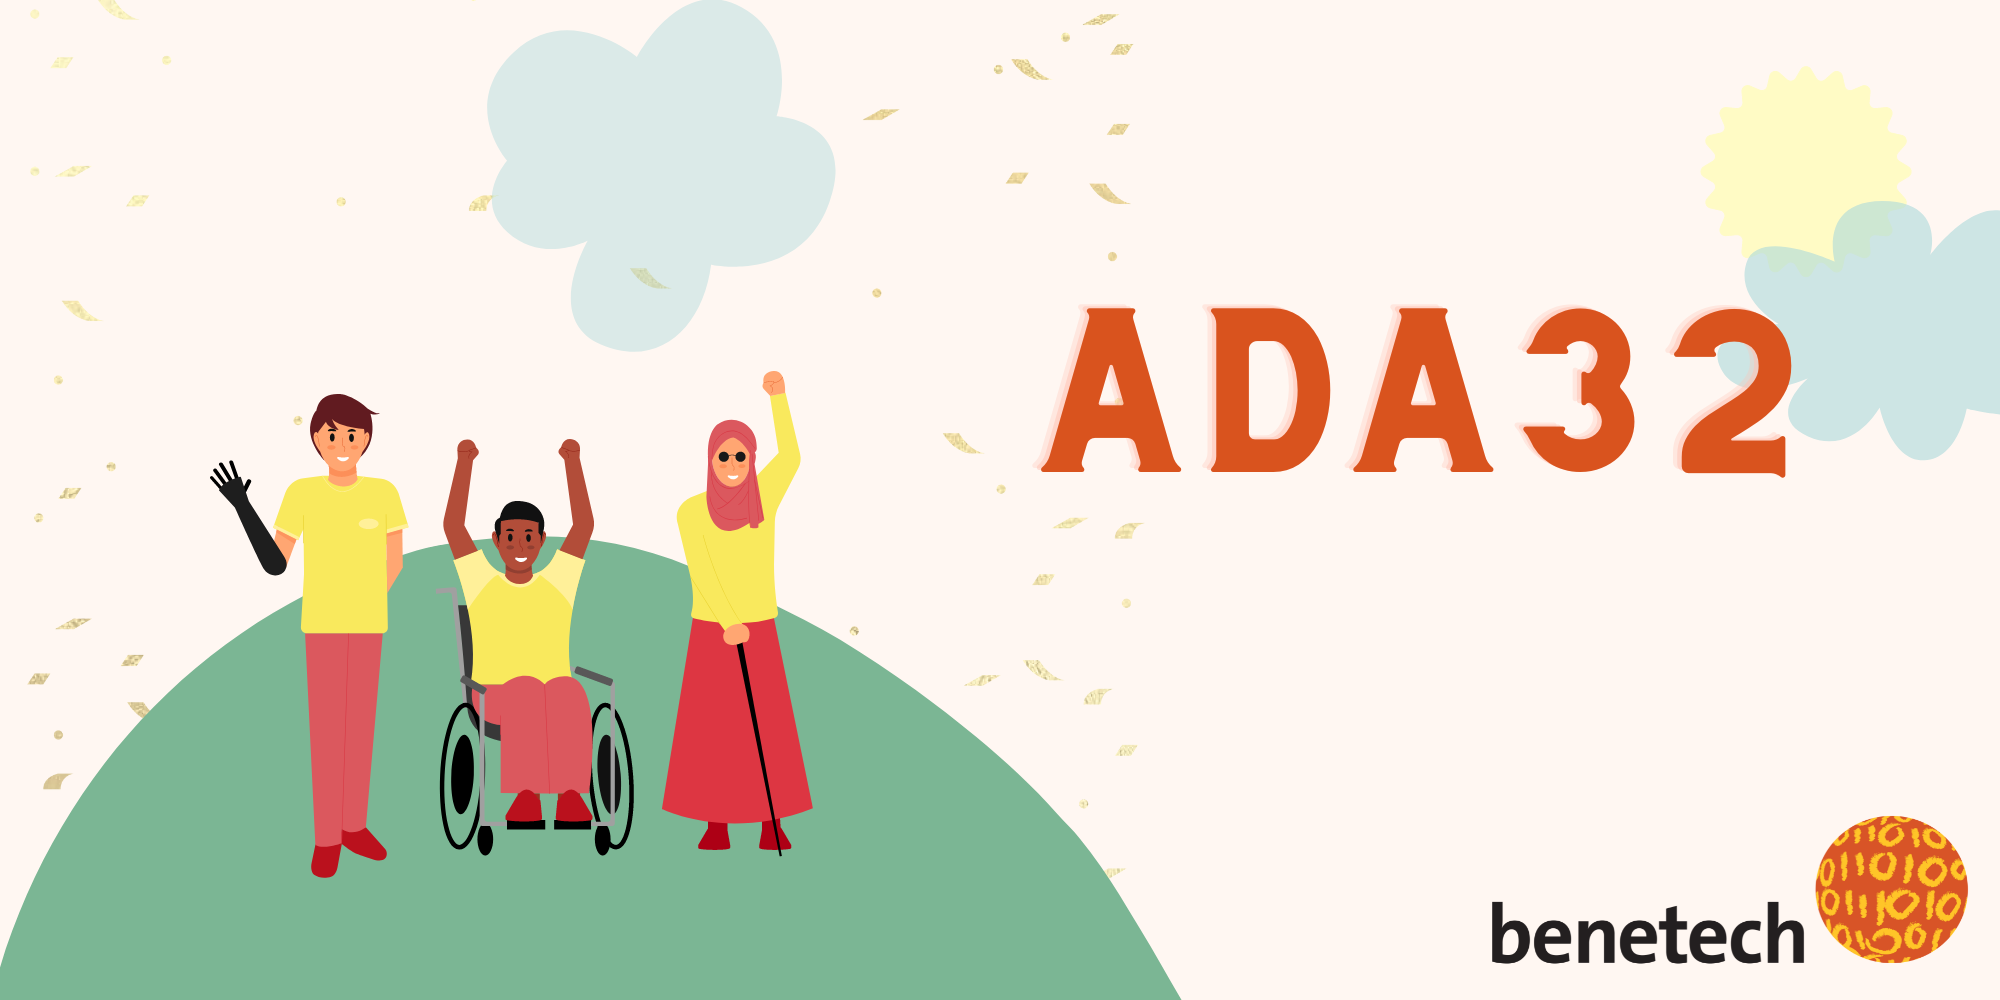 Three figures appear to the left of ADA32: one man has a prosthetic arm, another man is in a wheelchair, and a woman is blind and holds a cane